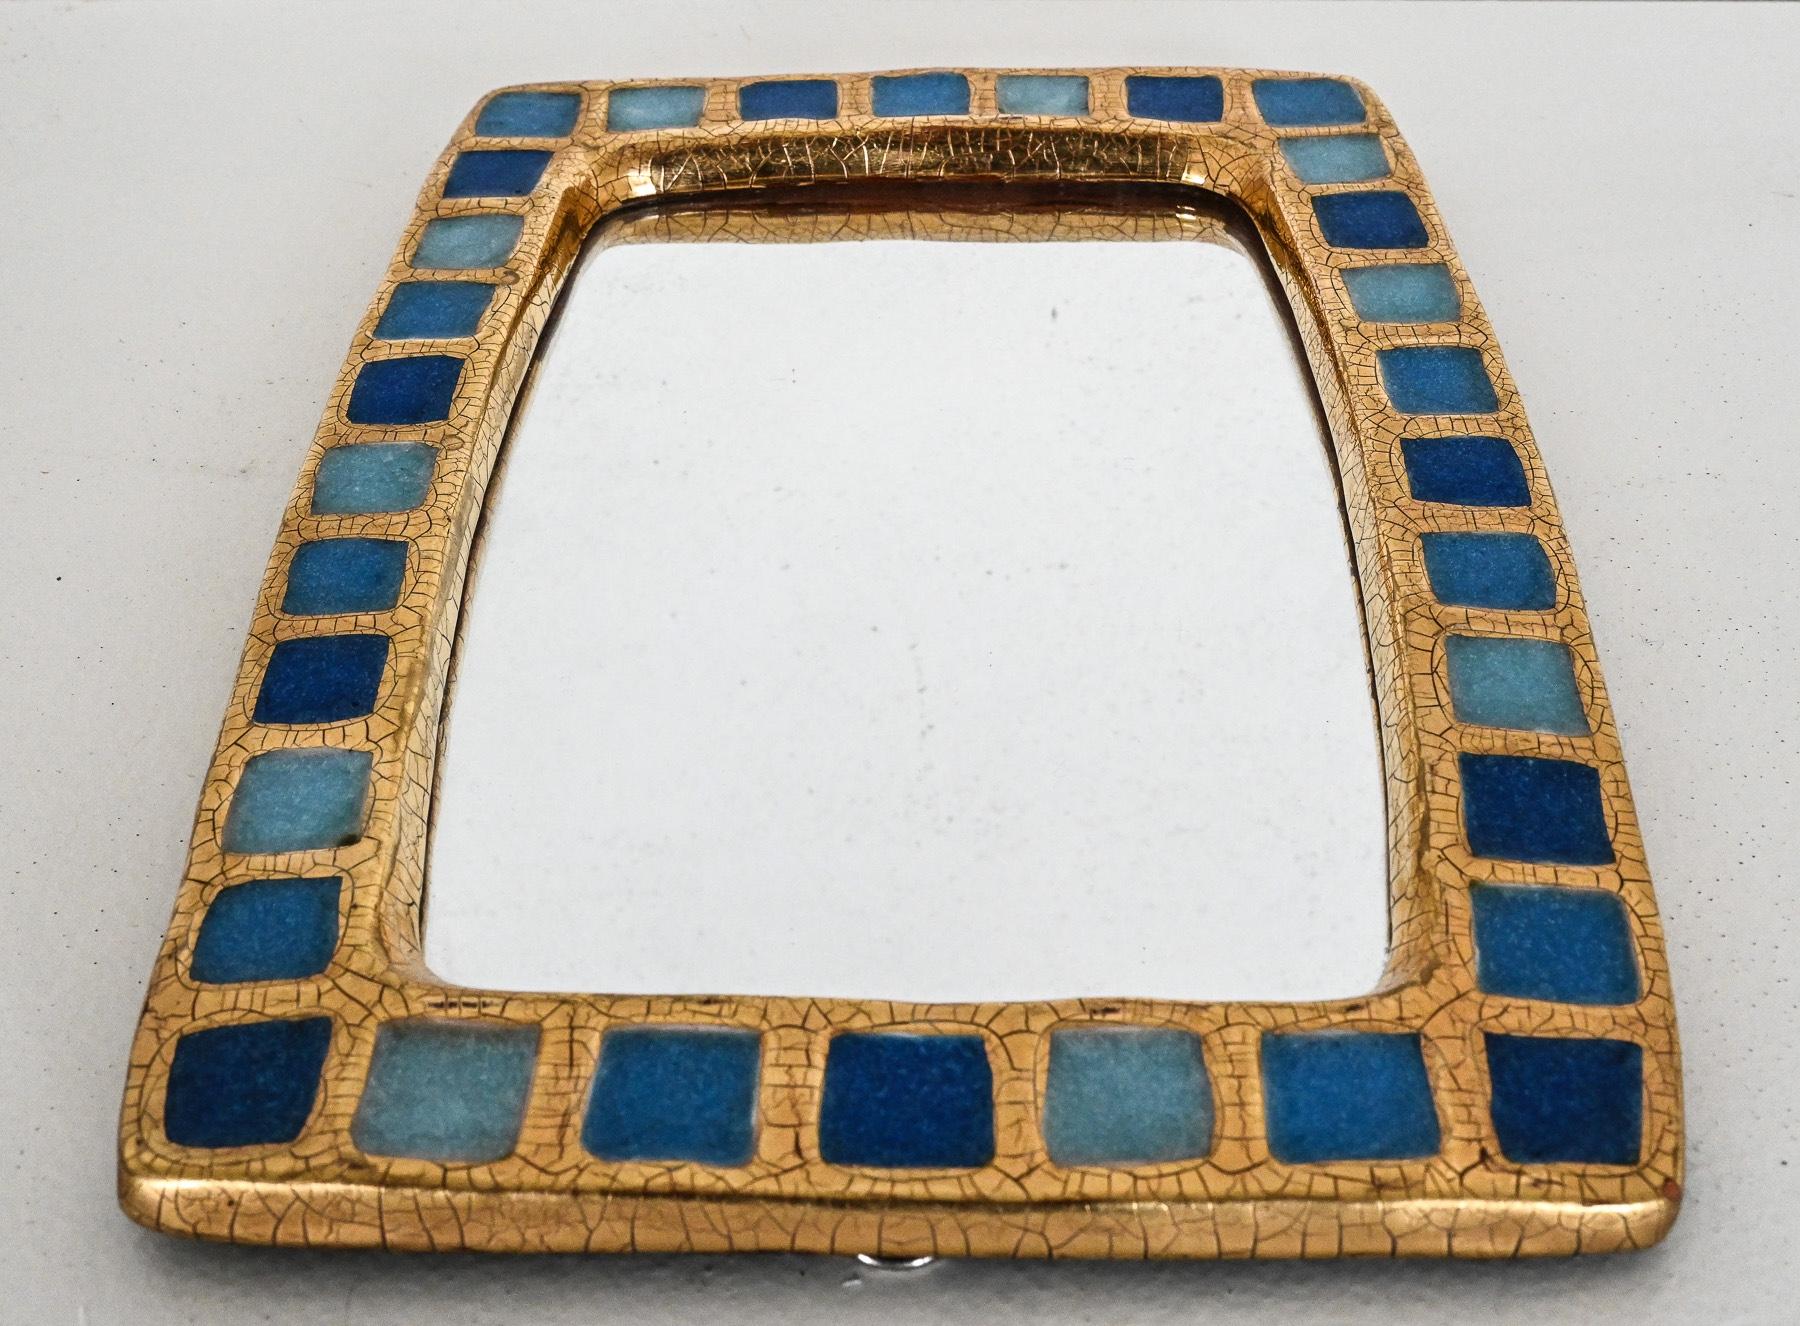 Excellent example of the “Pâte de verre long” mirror c. 1955 by Mithé Espelt
embossed earthenware, crystallised glass in shades of blue and crackled gold. Retains its original green felt backing.
This style of mirror can also be found in